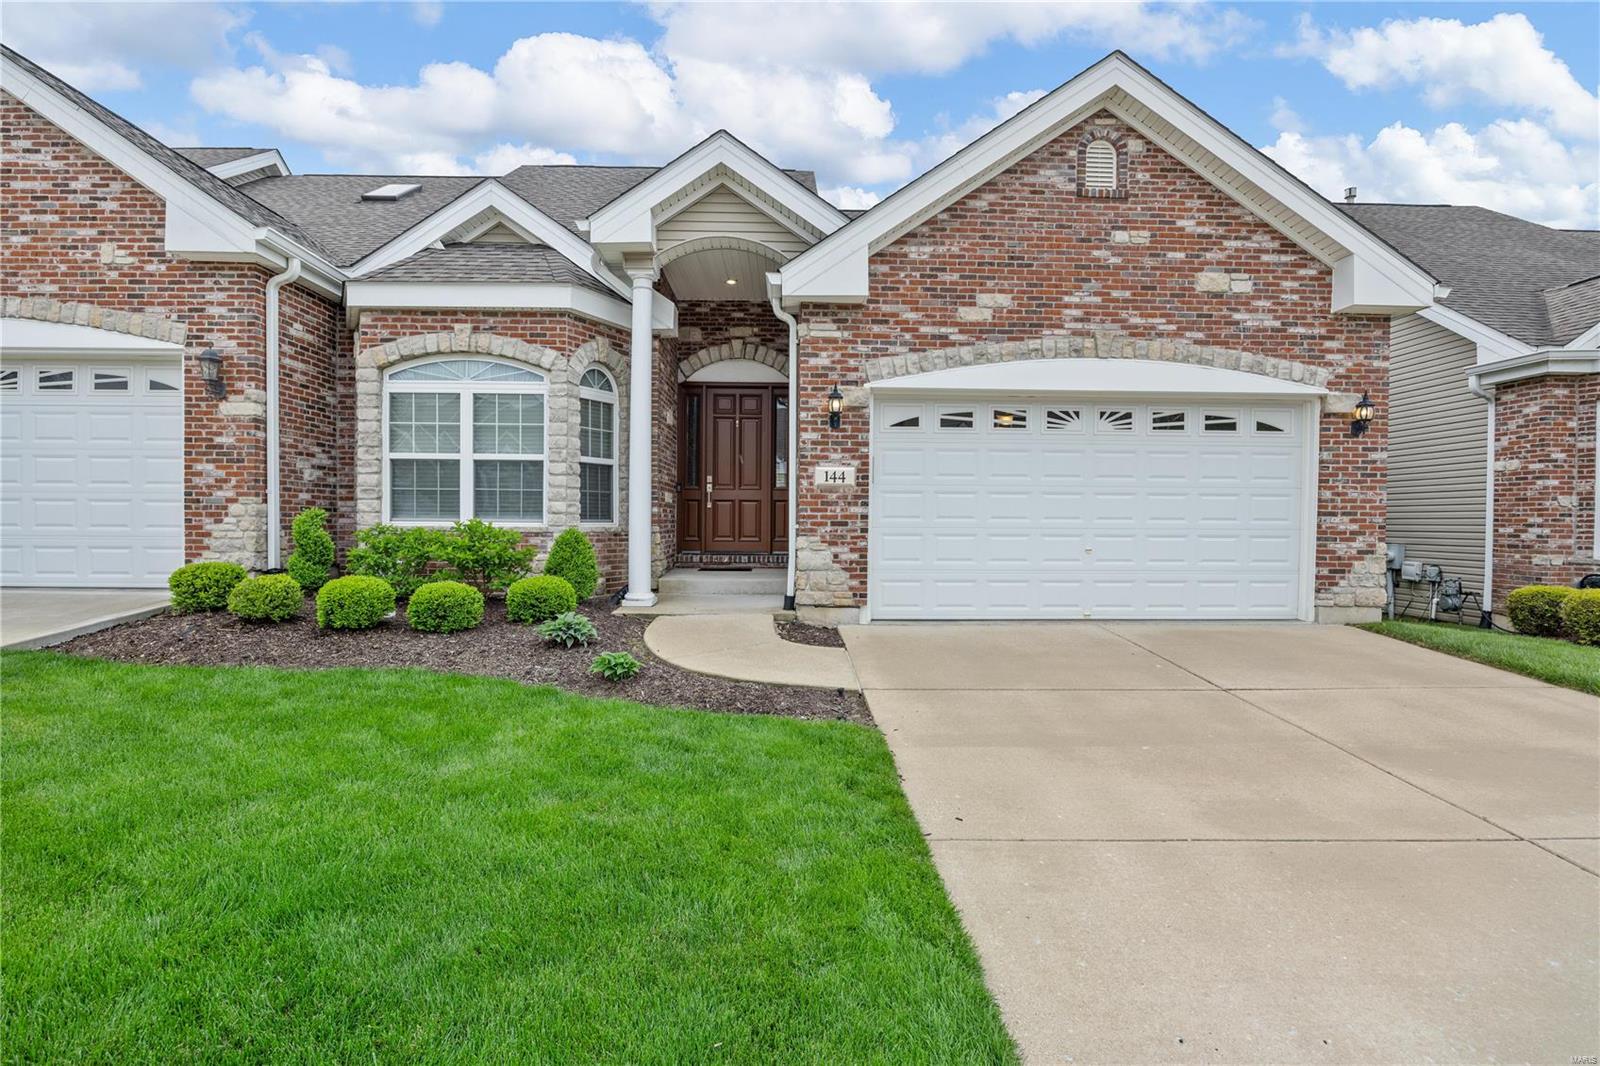 View St Charles, MO 63303 townhome